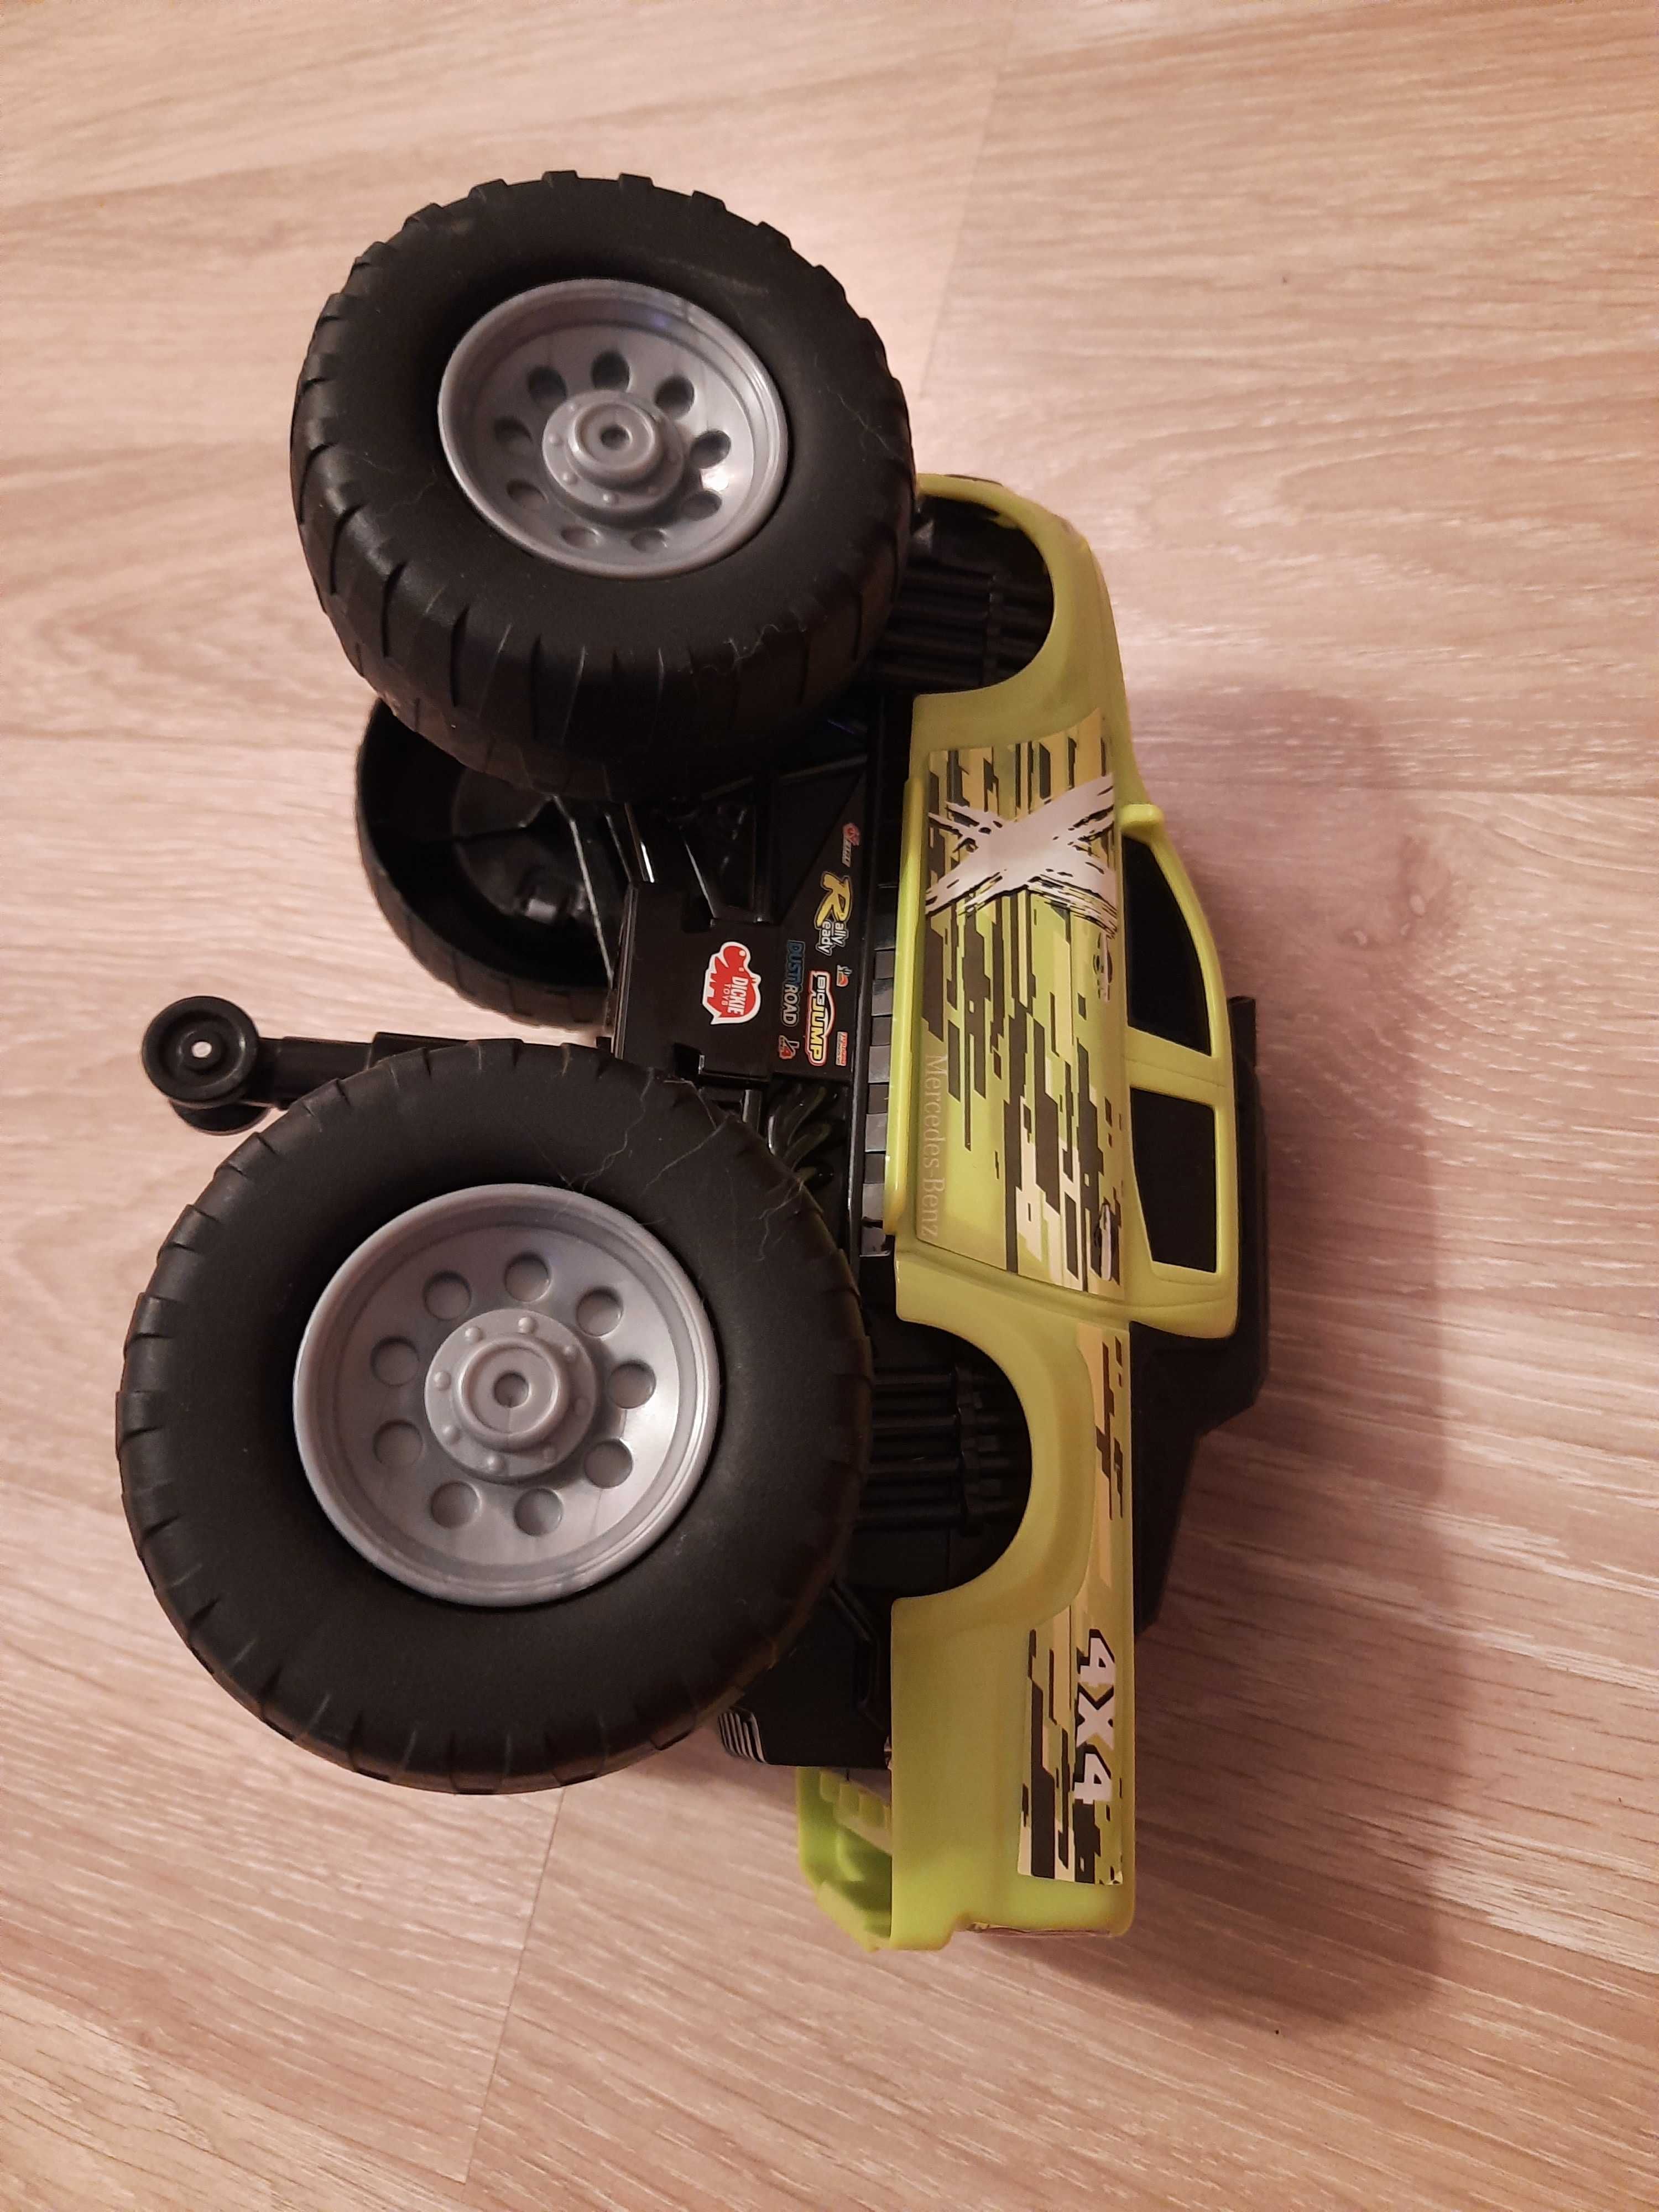 Dickie Toys Monster truck Mercedes-Benz